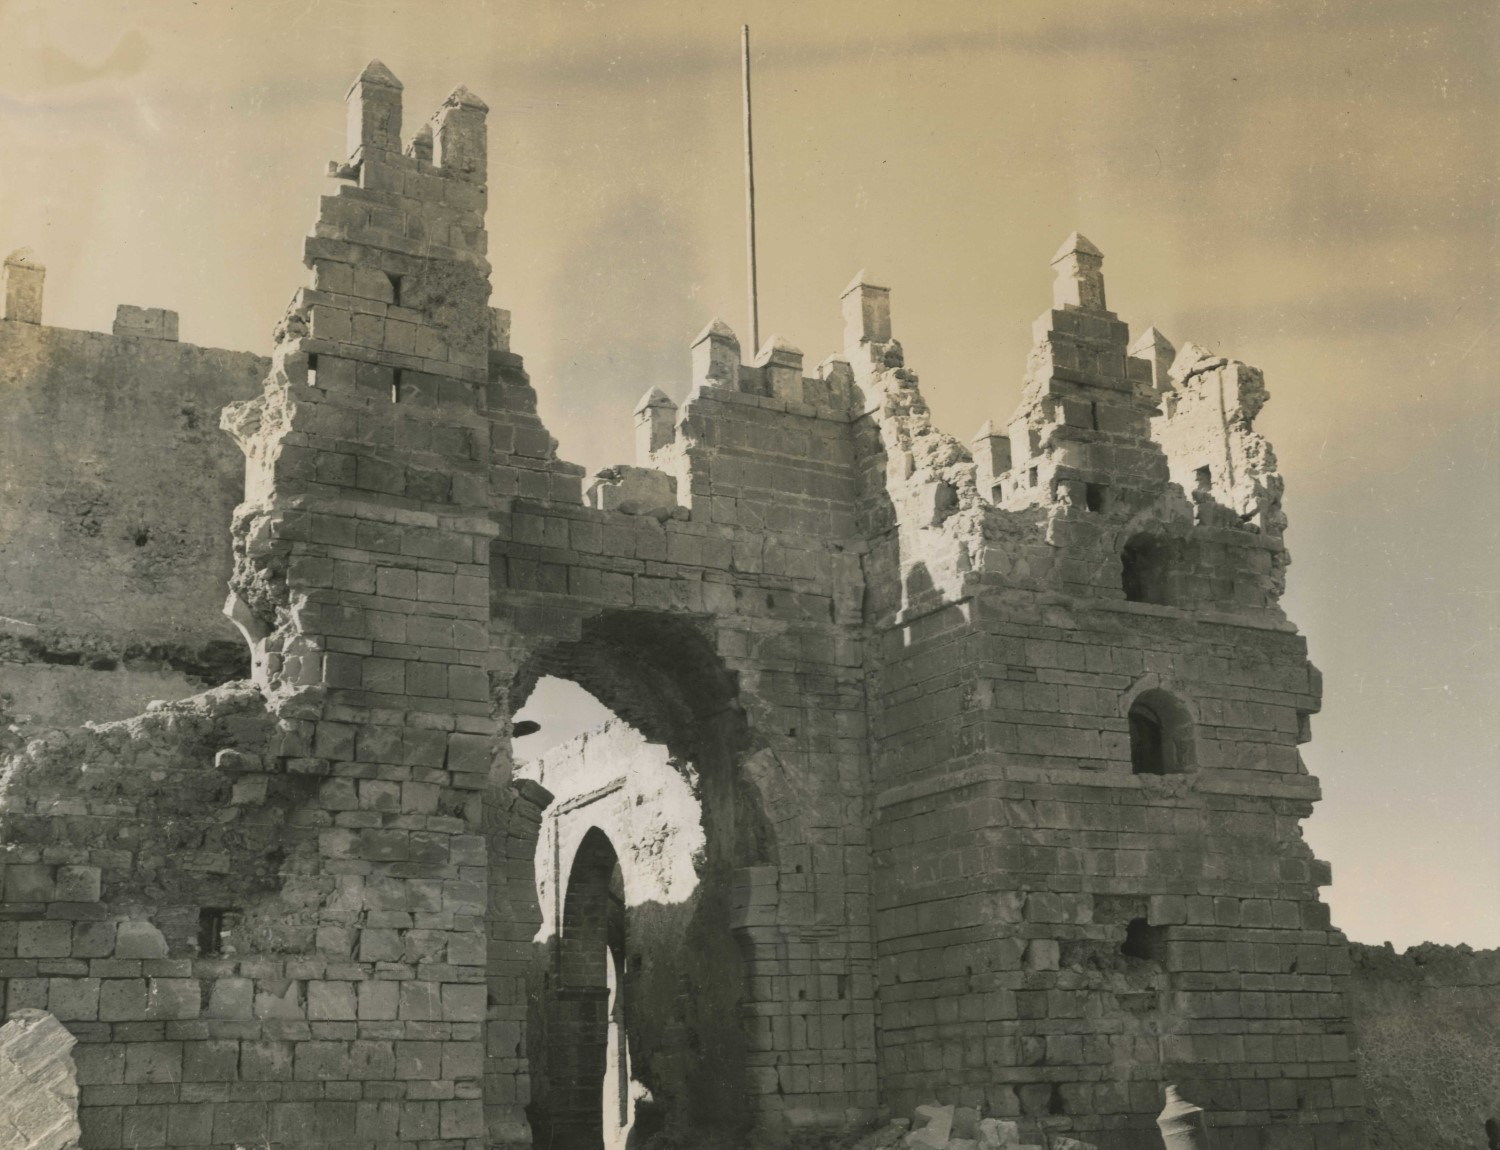 Qasba al-Mahdiyya - Archway of a Spanish fort. At the time in 1943, it was under French possession at Mehdia Plage, Morocco